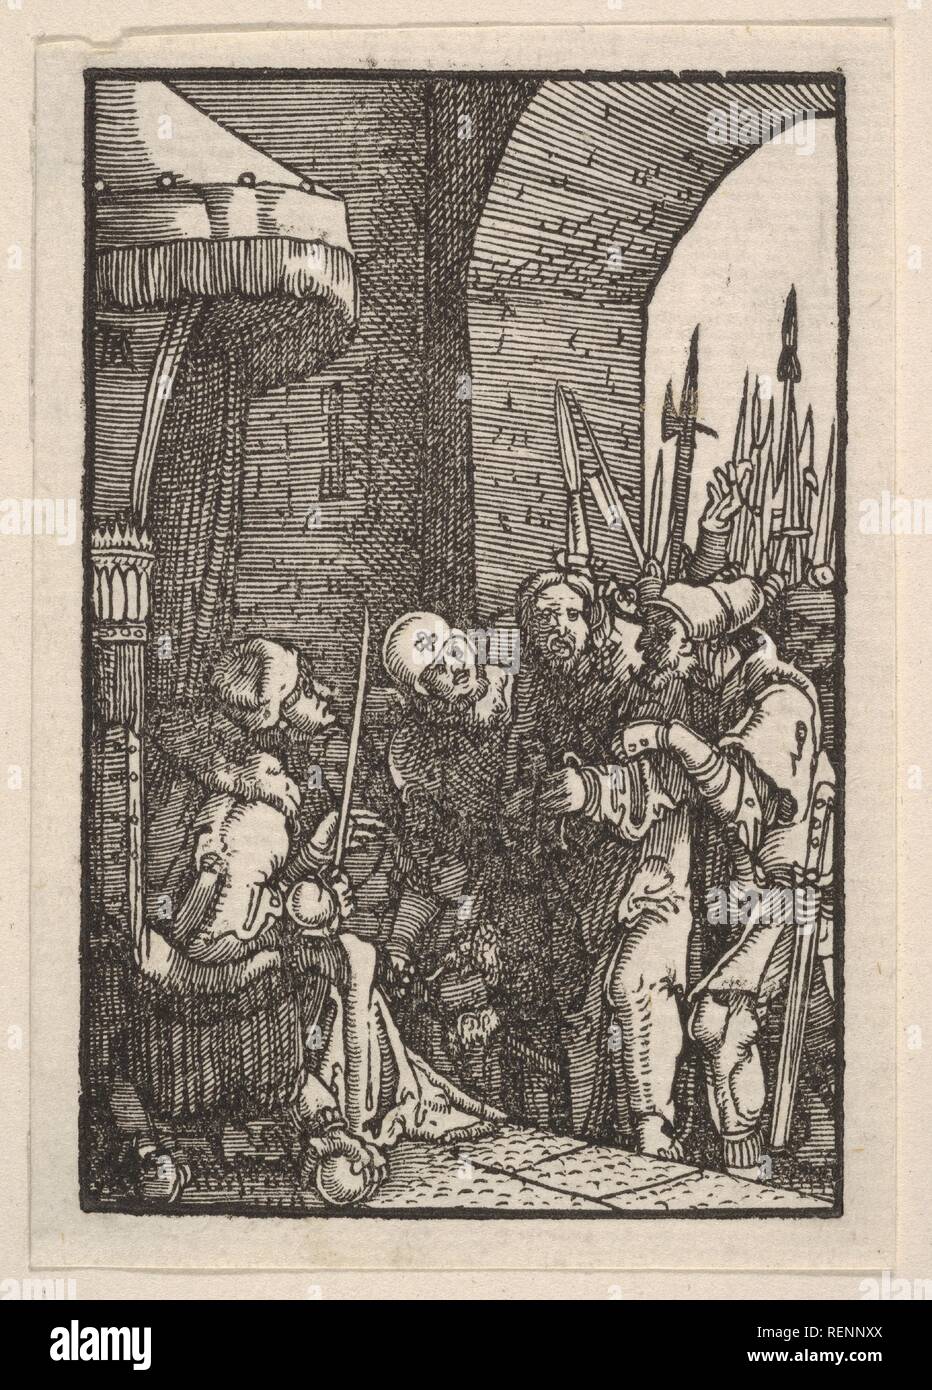 Christ Before Pilate, from The Fall and Salvation of Mankind Through the Life and Passion of Christ. Artist: Albrecht Altdorfer (German, Regensburg ca. 1480-1538 Regensburg). Dimensions: Sheet: 3 1/8 × 2 3/16 in. (7.9 × 5.5 cm). Date: ca. 1513. Museum: Metropolitan Museum of Art, New York, USA. Stock Photo